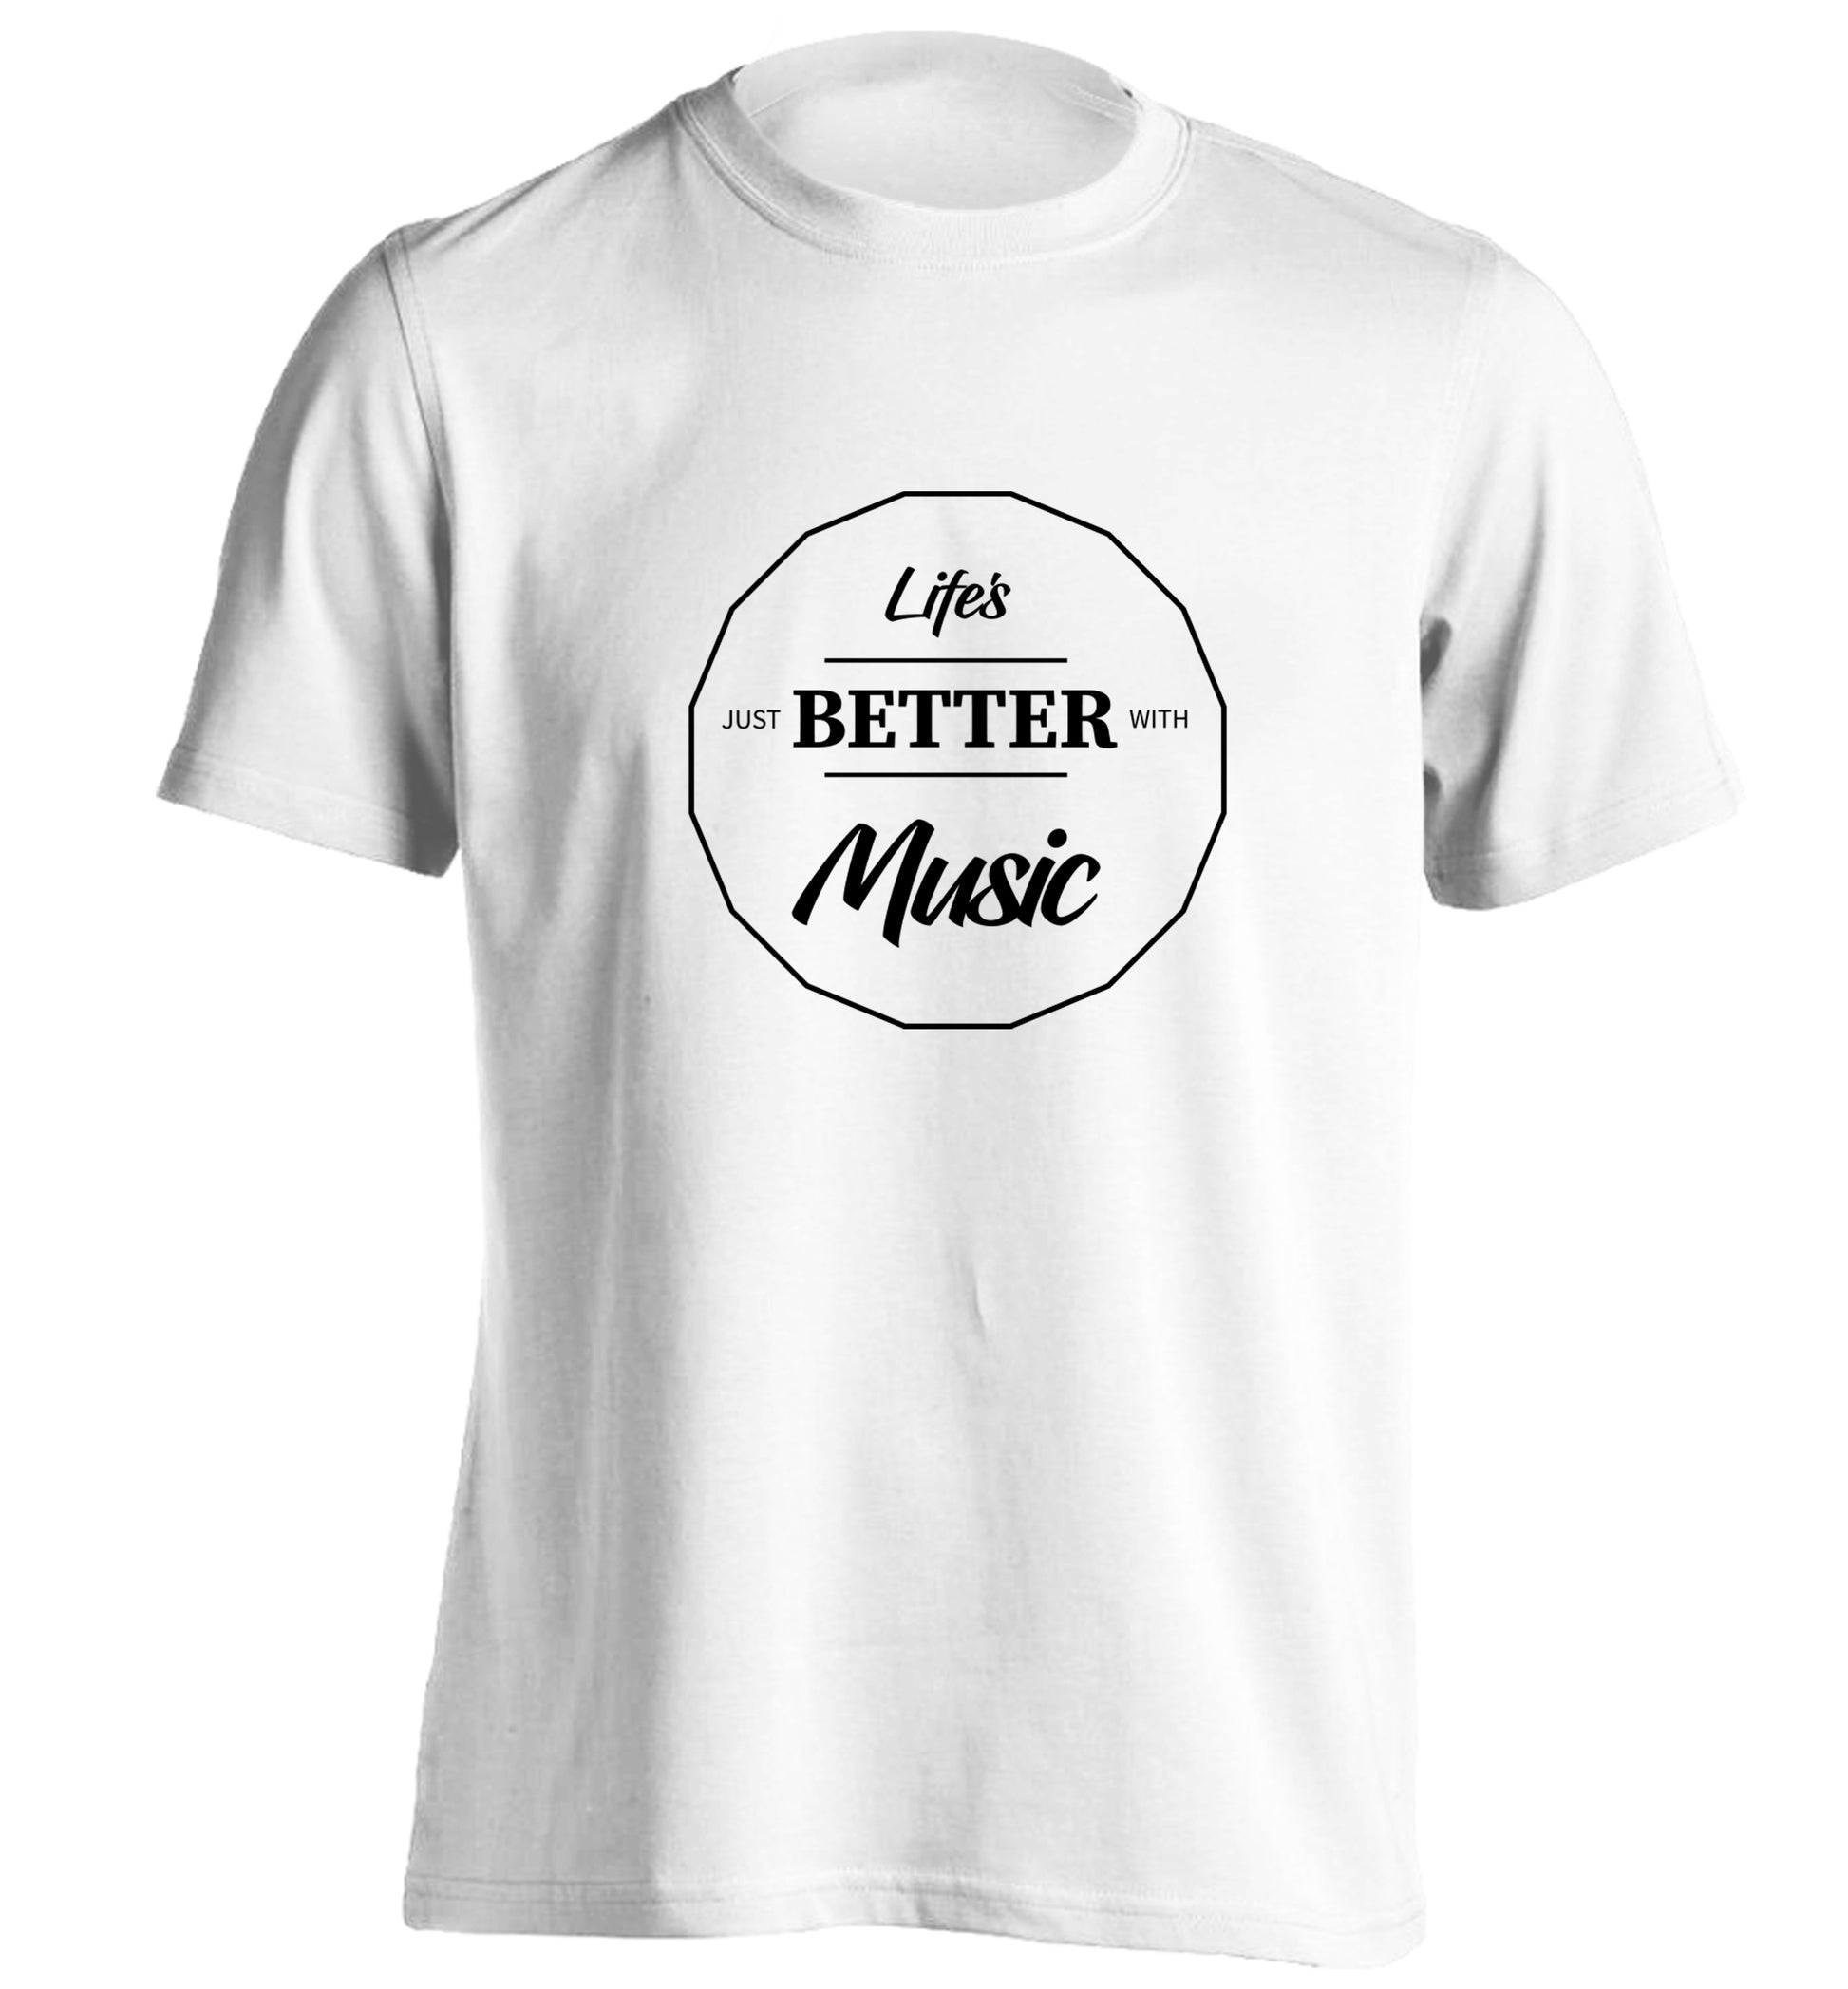 Life is Better With Music adults unisex white Tshirt 2XL